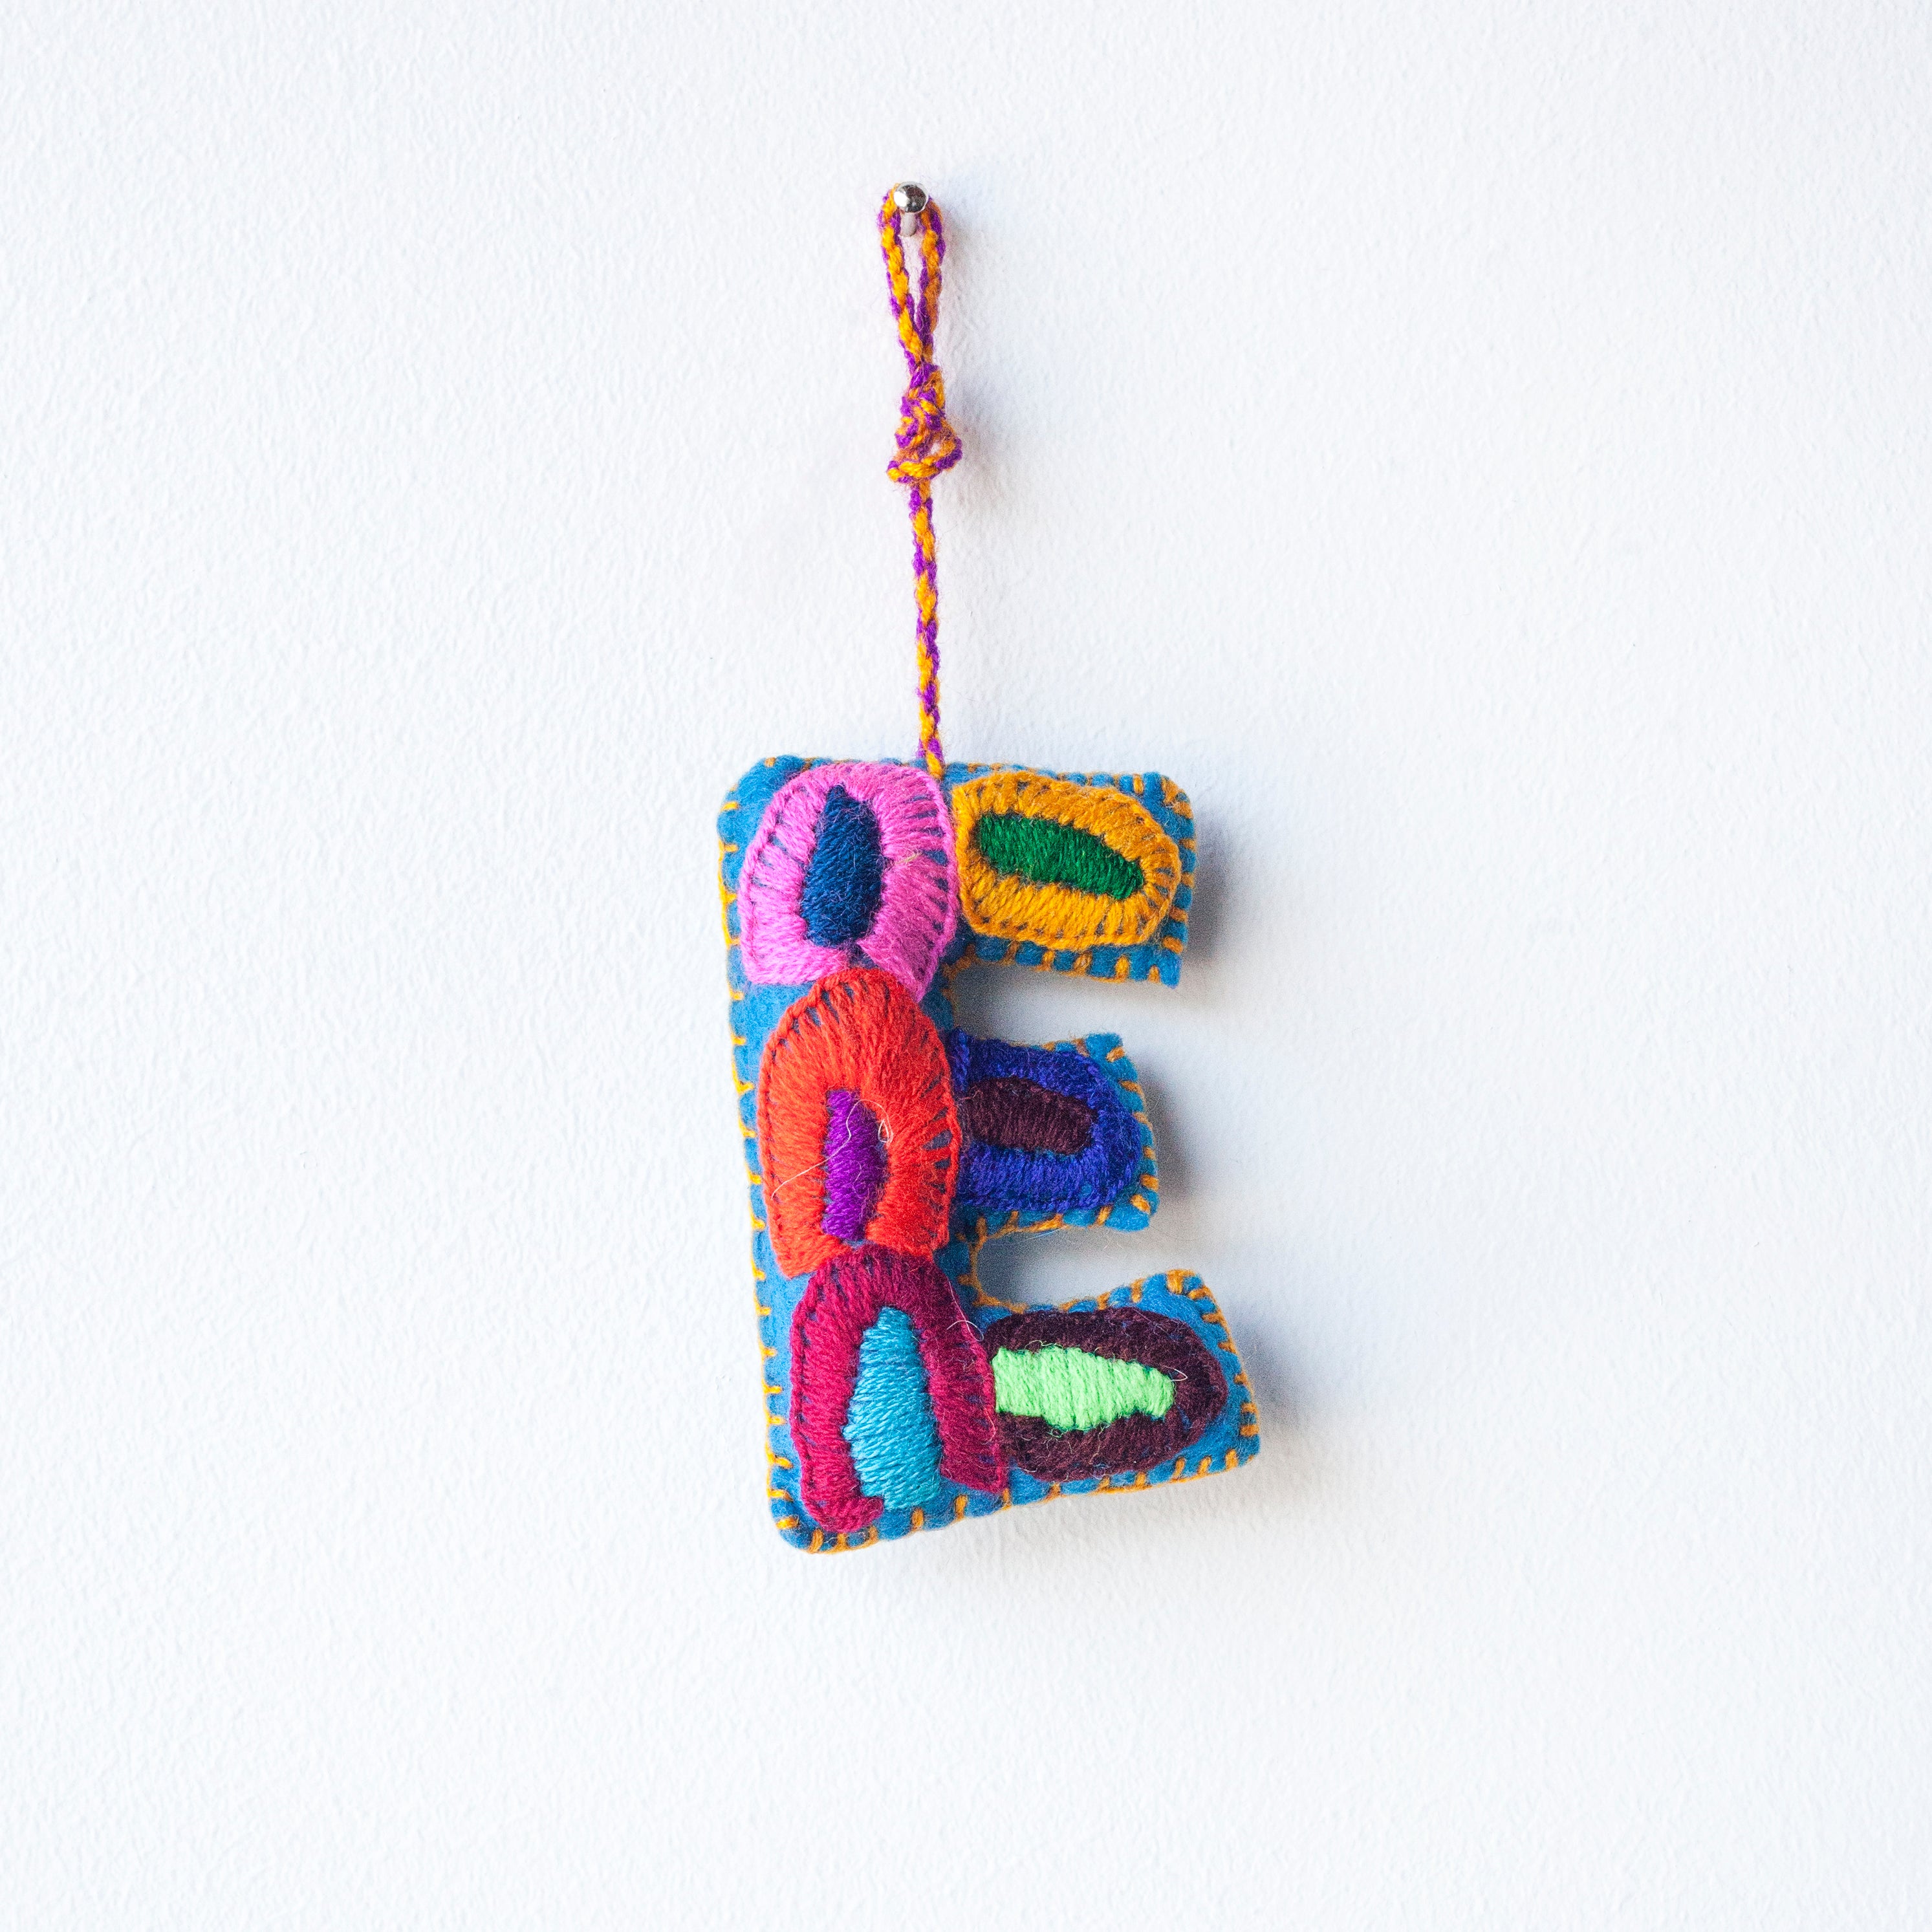 Colorful felt letter "E" with multicolor floral hand-embroidery hanging by a colorful string.